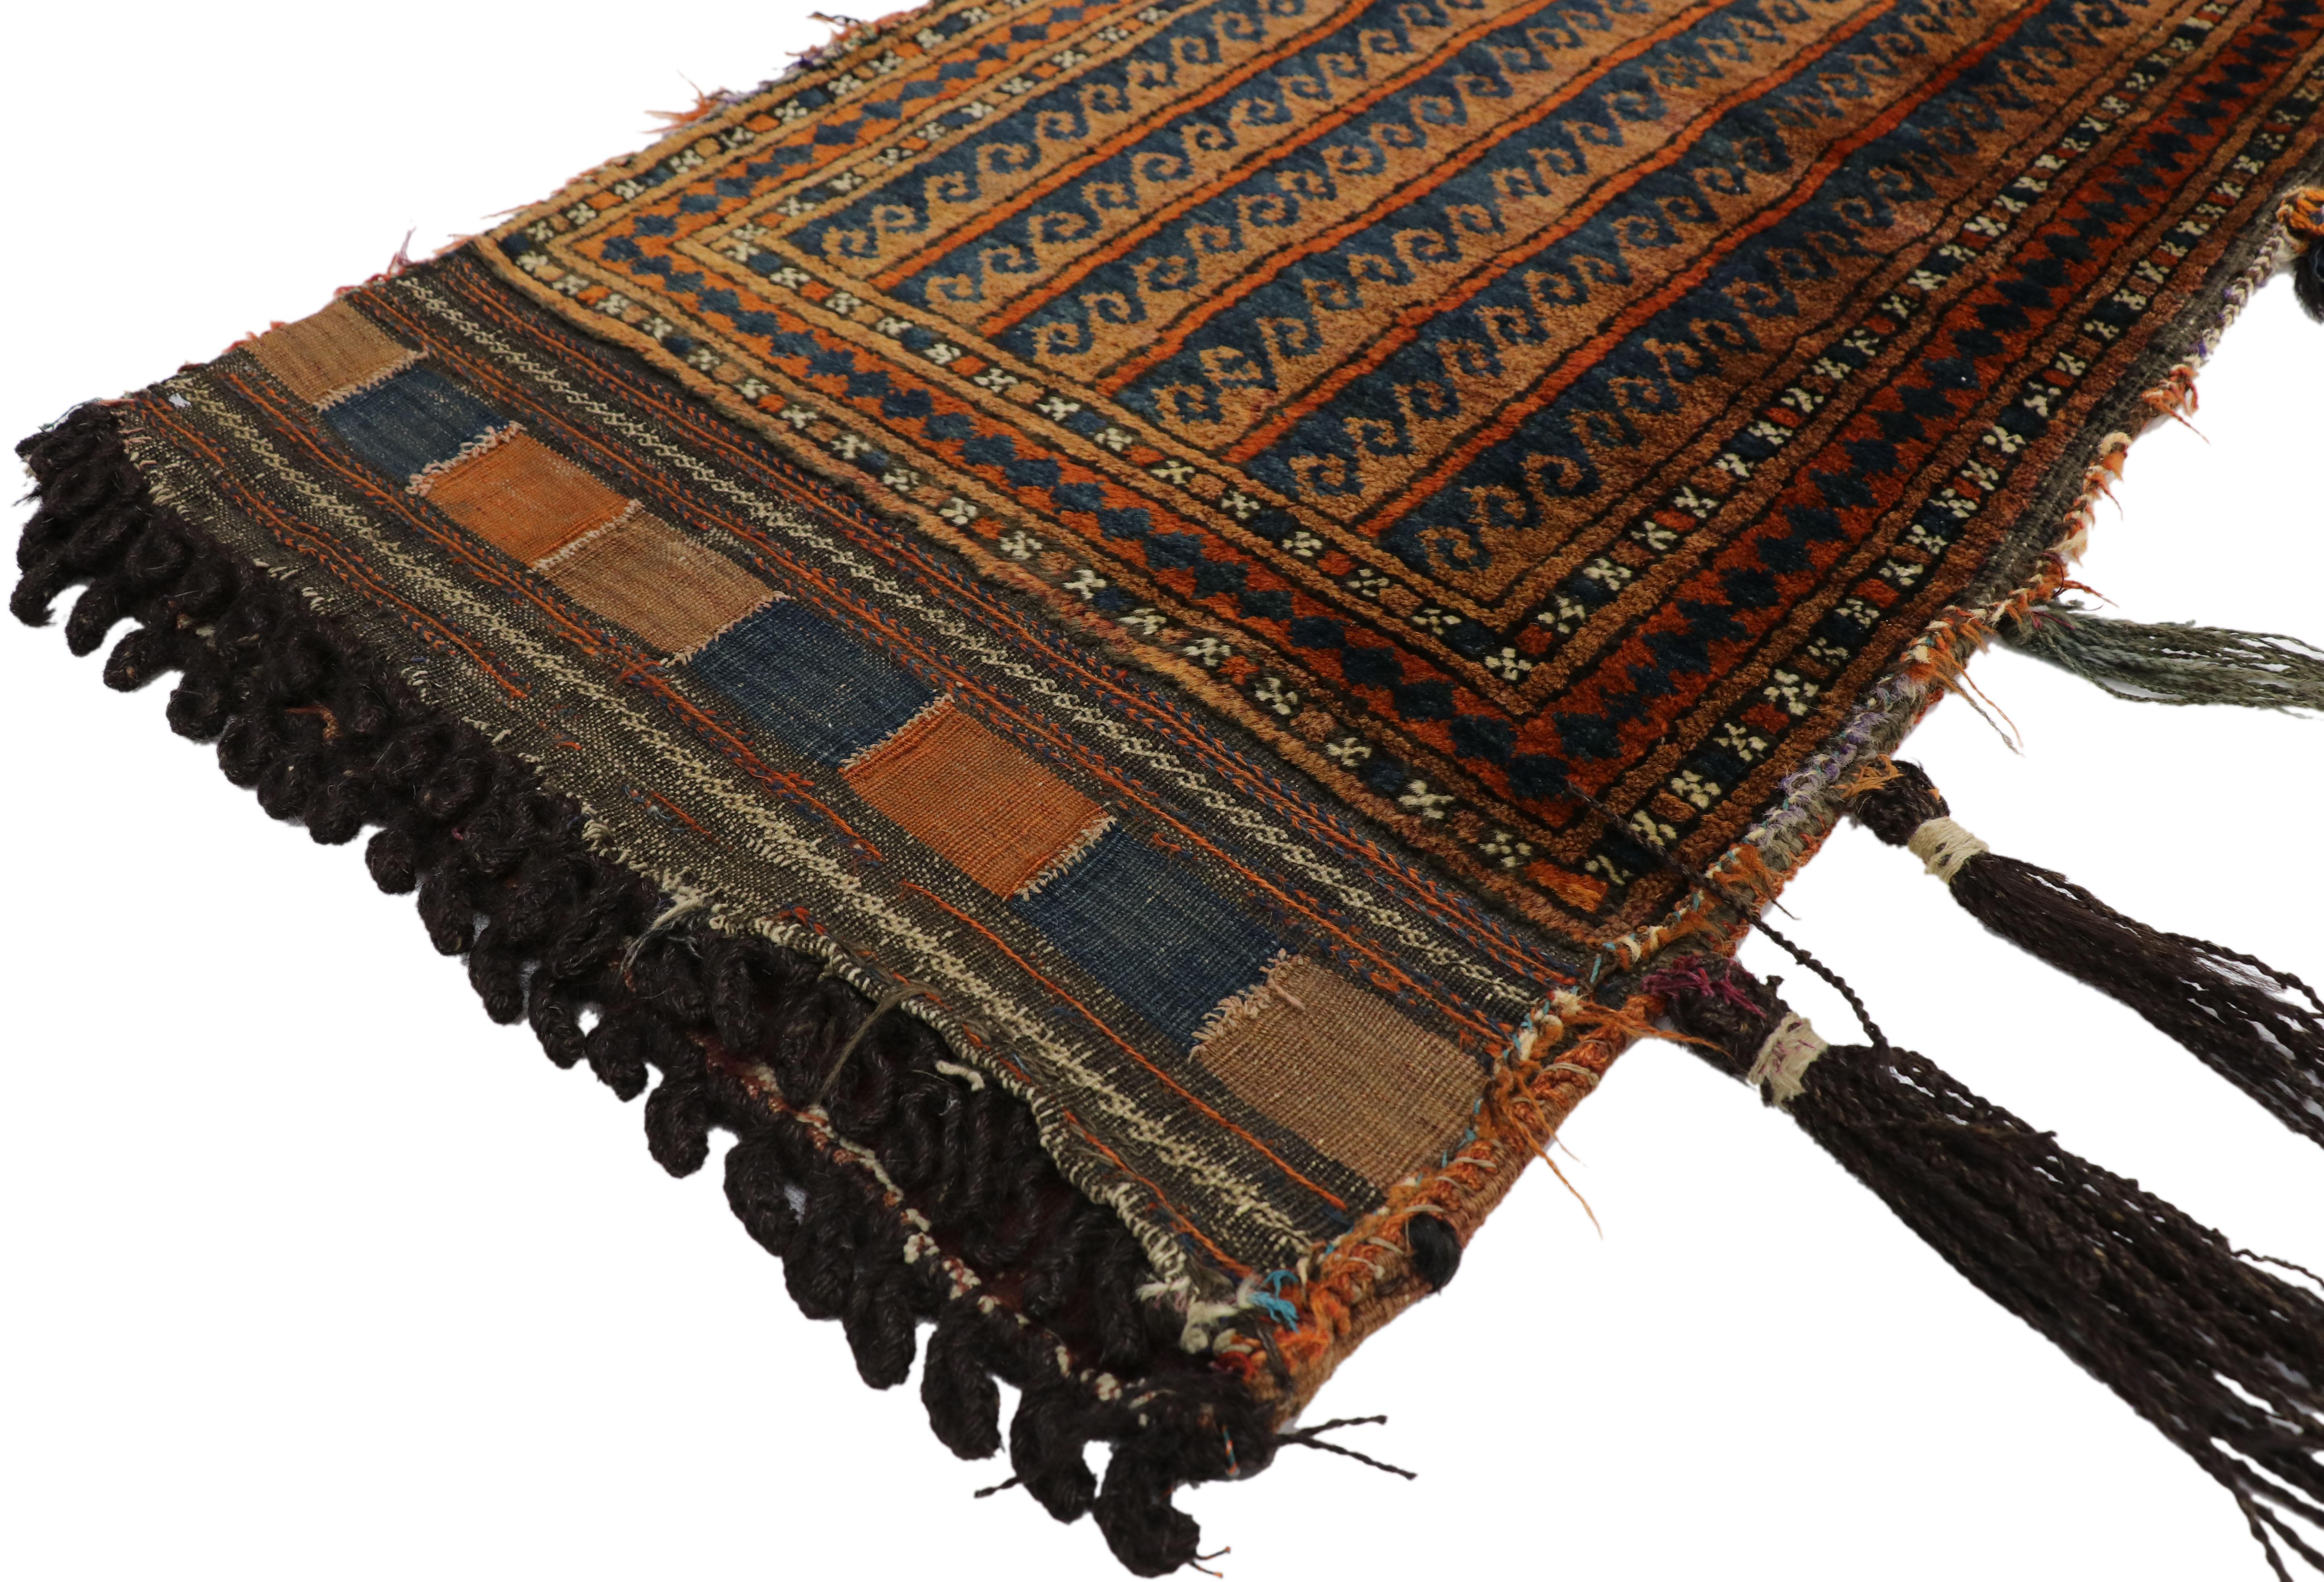 76632 antique Afghan Baluch Balisht Bag, Tribal style tapestry, nomadic wall hanging. This hand knotted wool antique Afghan bag features a series of repeating, stylized Vitruvian scroll known as a running dog border which resembles a wave. This hand